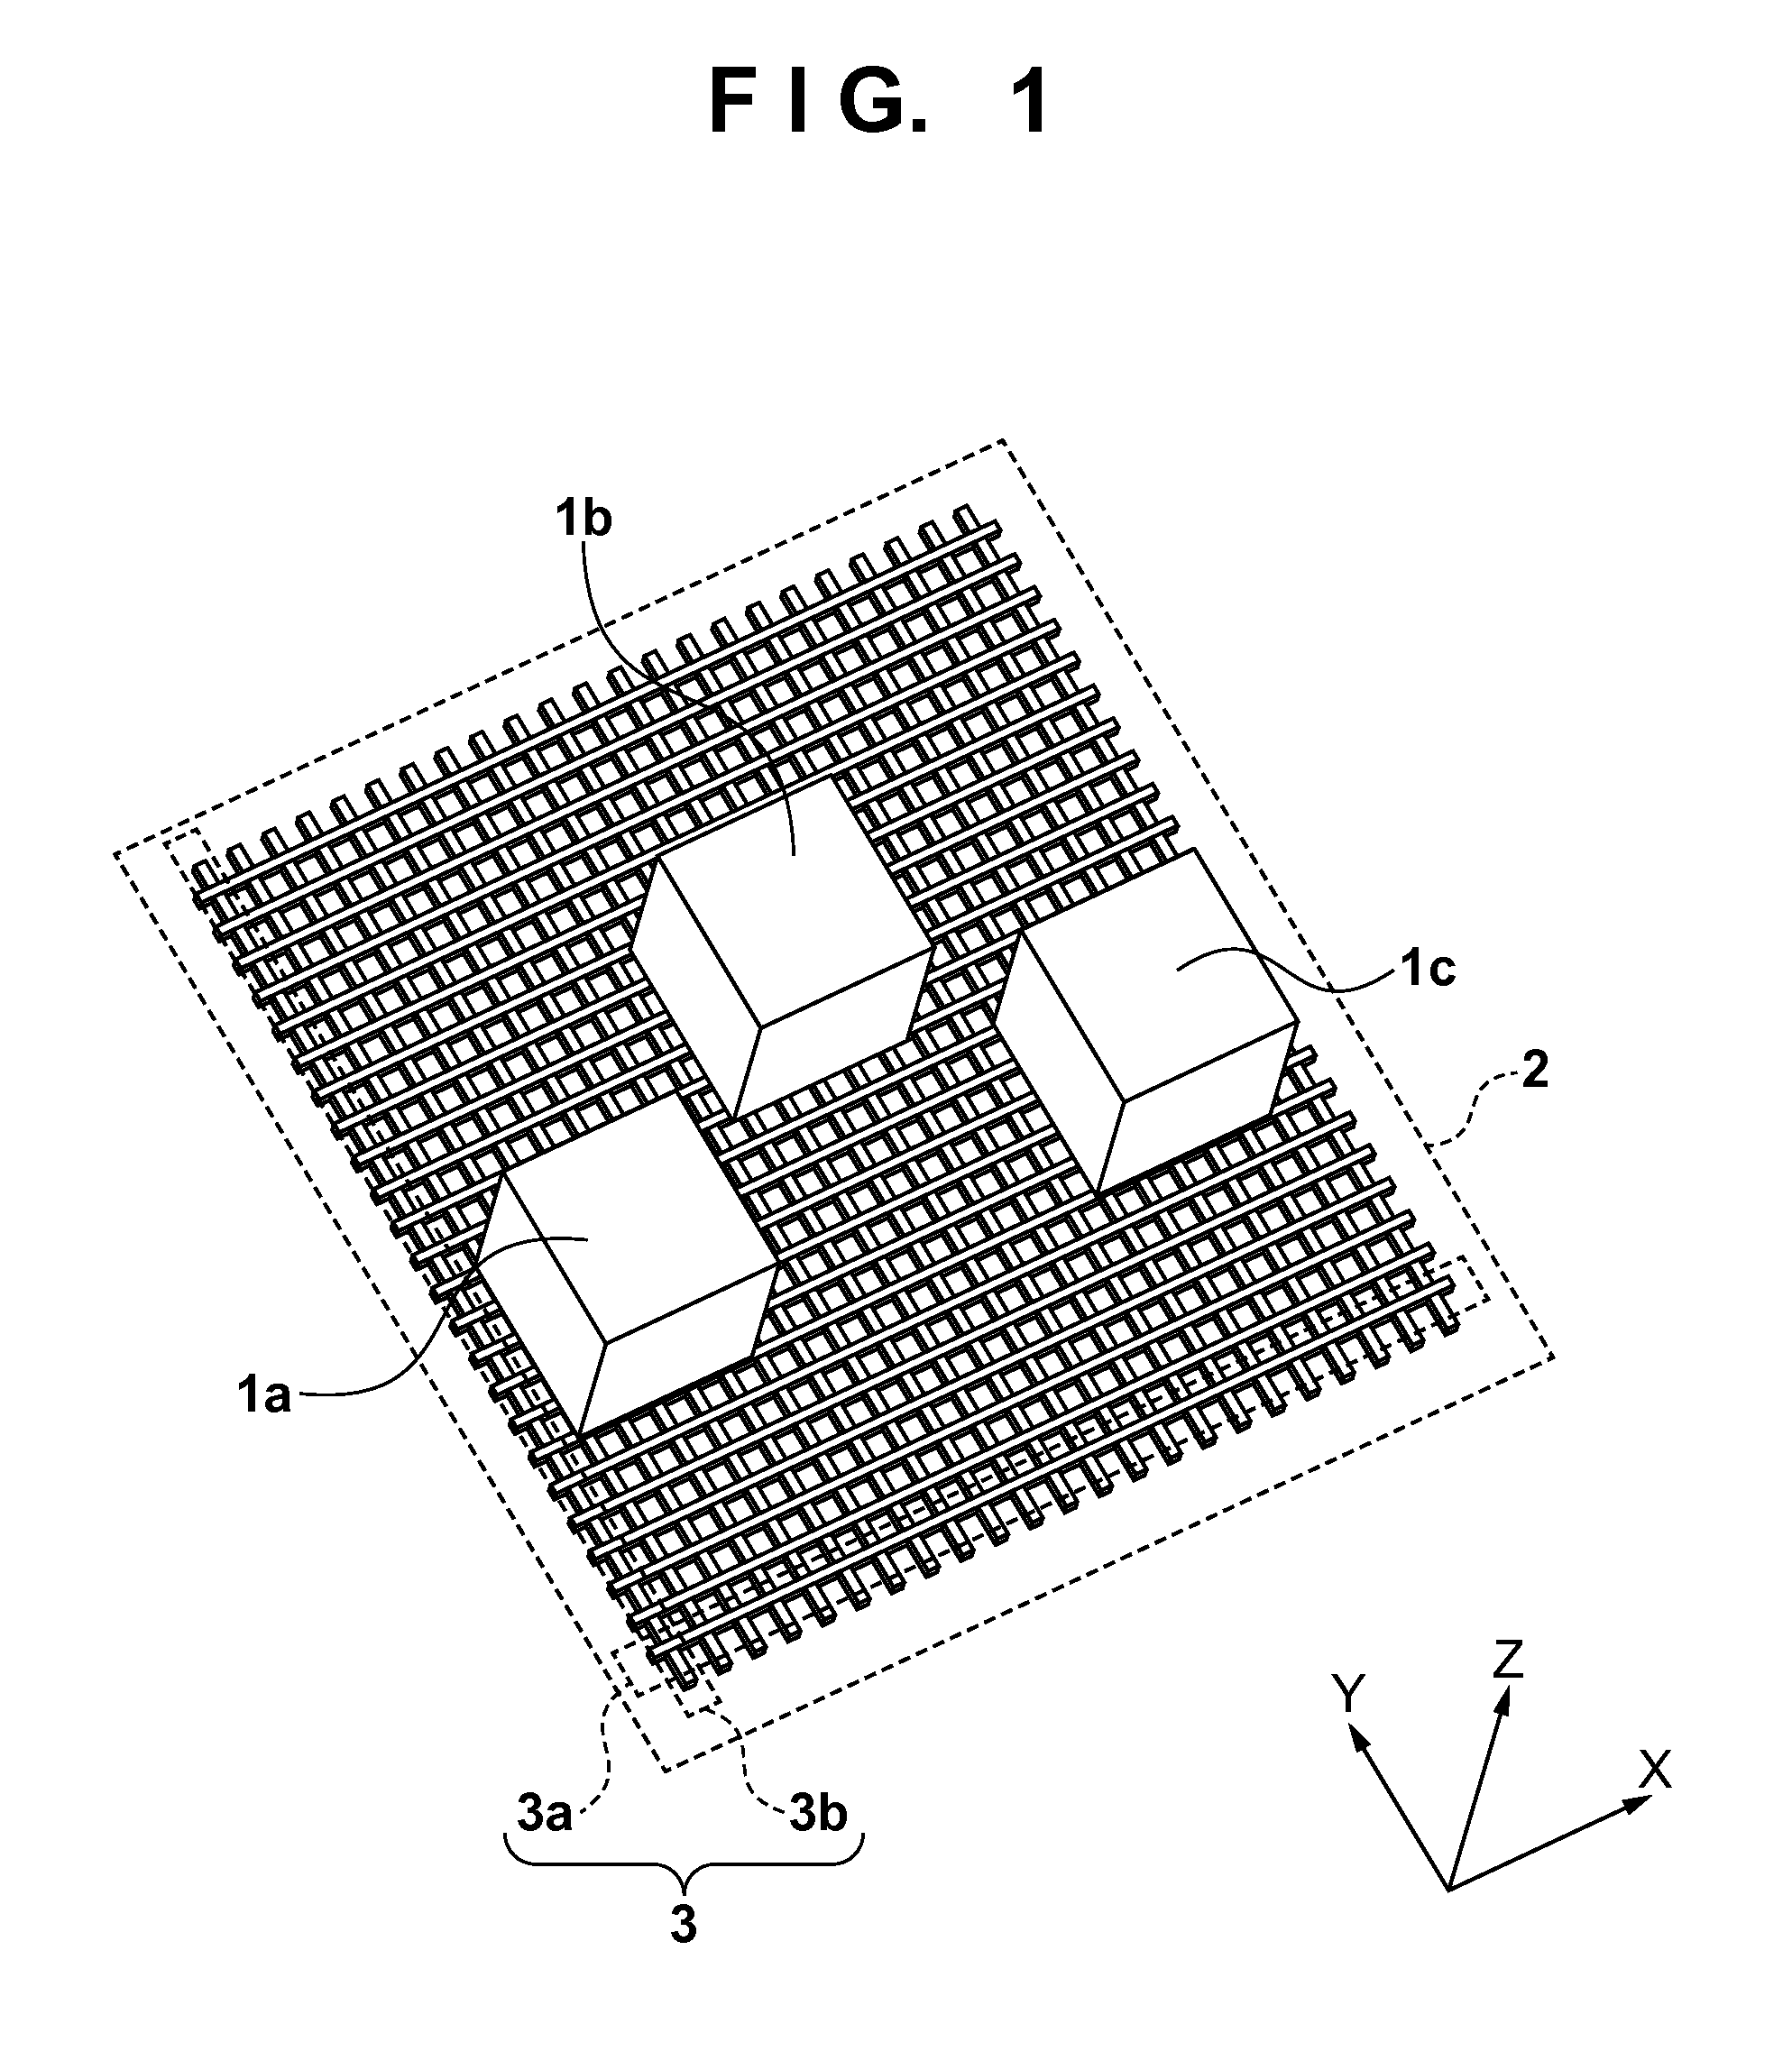 Processing machine system and method of positioning processing machines